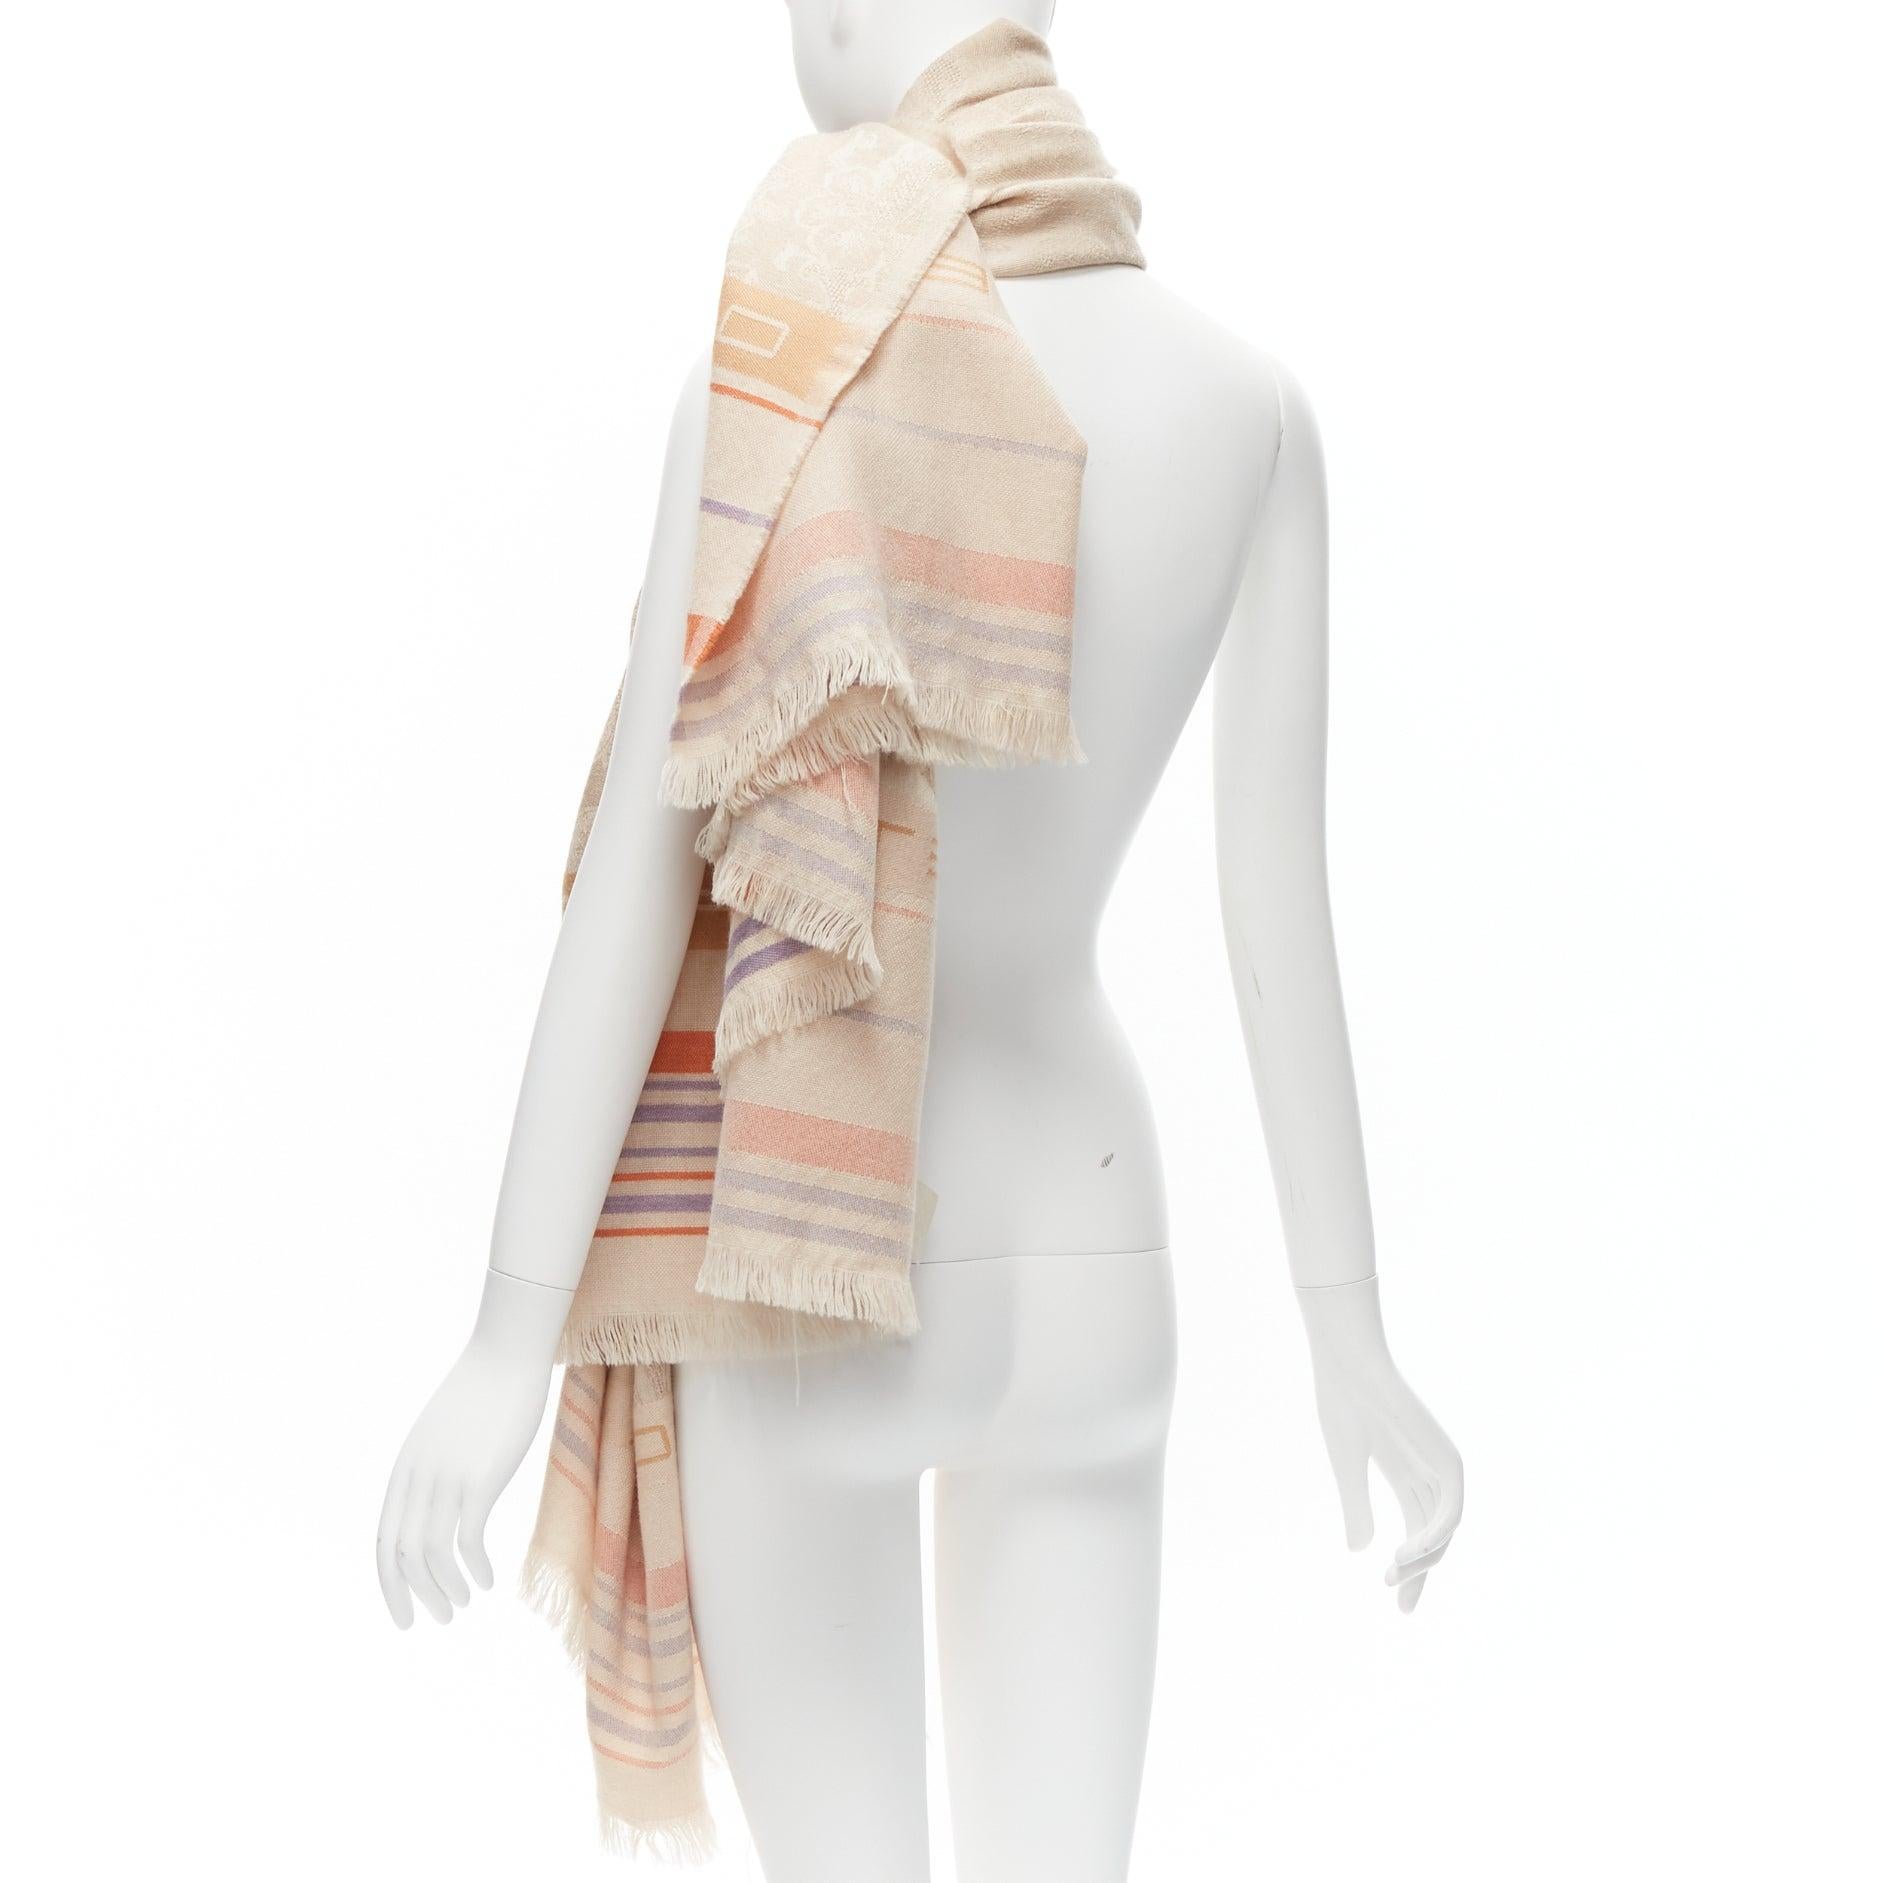 ETRO Home Collection 100% merino wool beige logo stripes fringe scarf For Sale 1